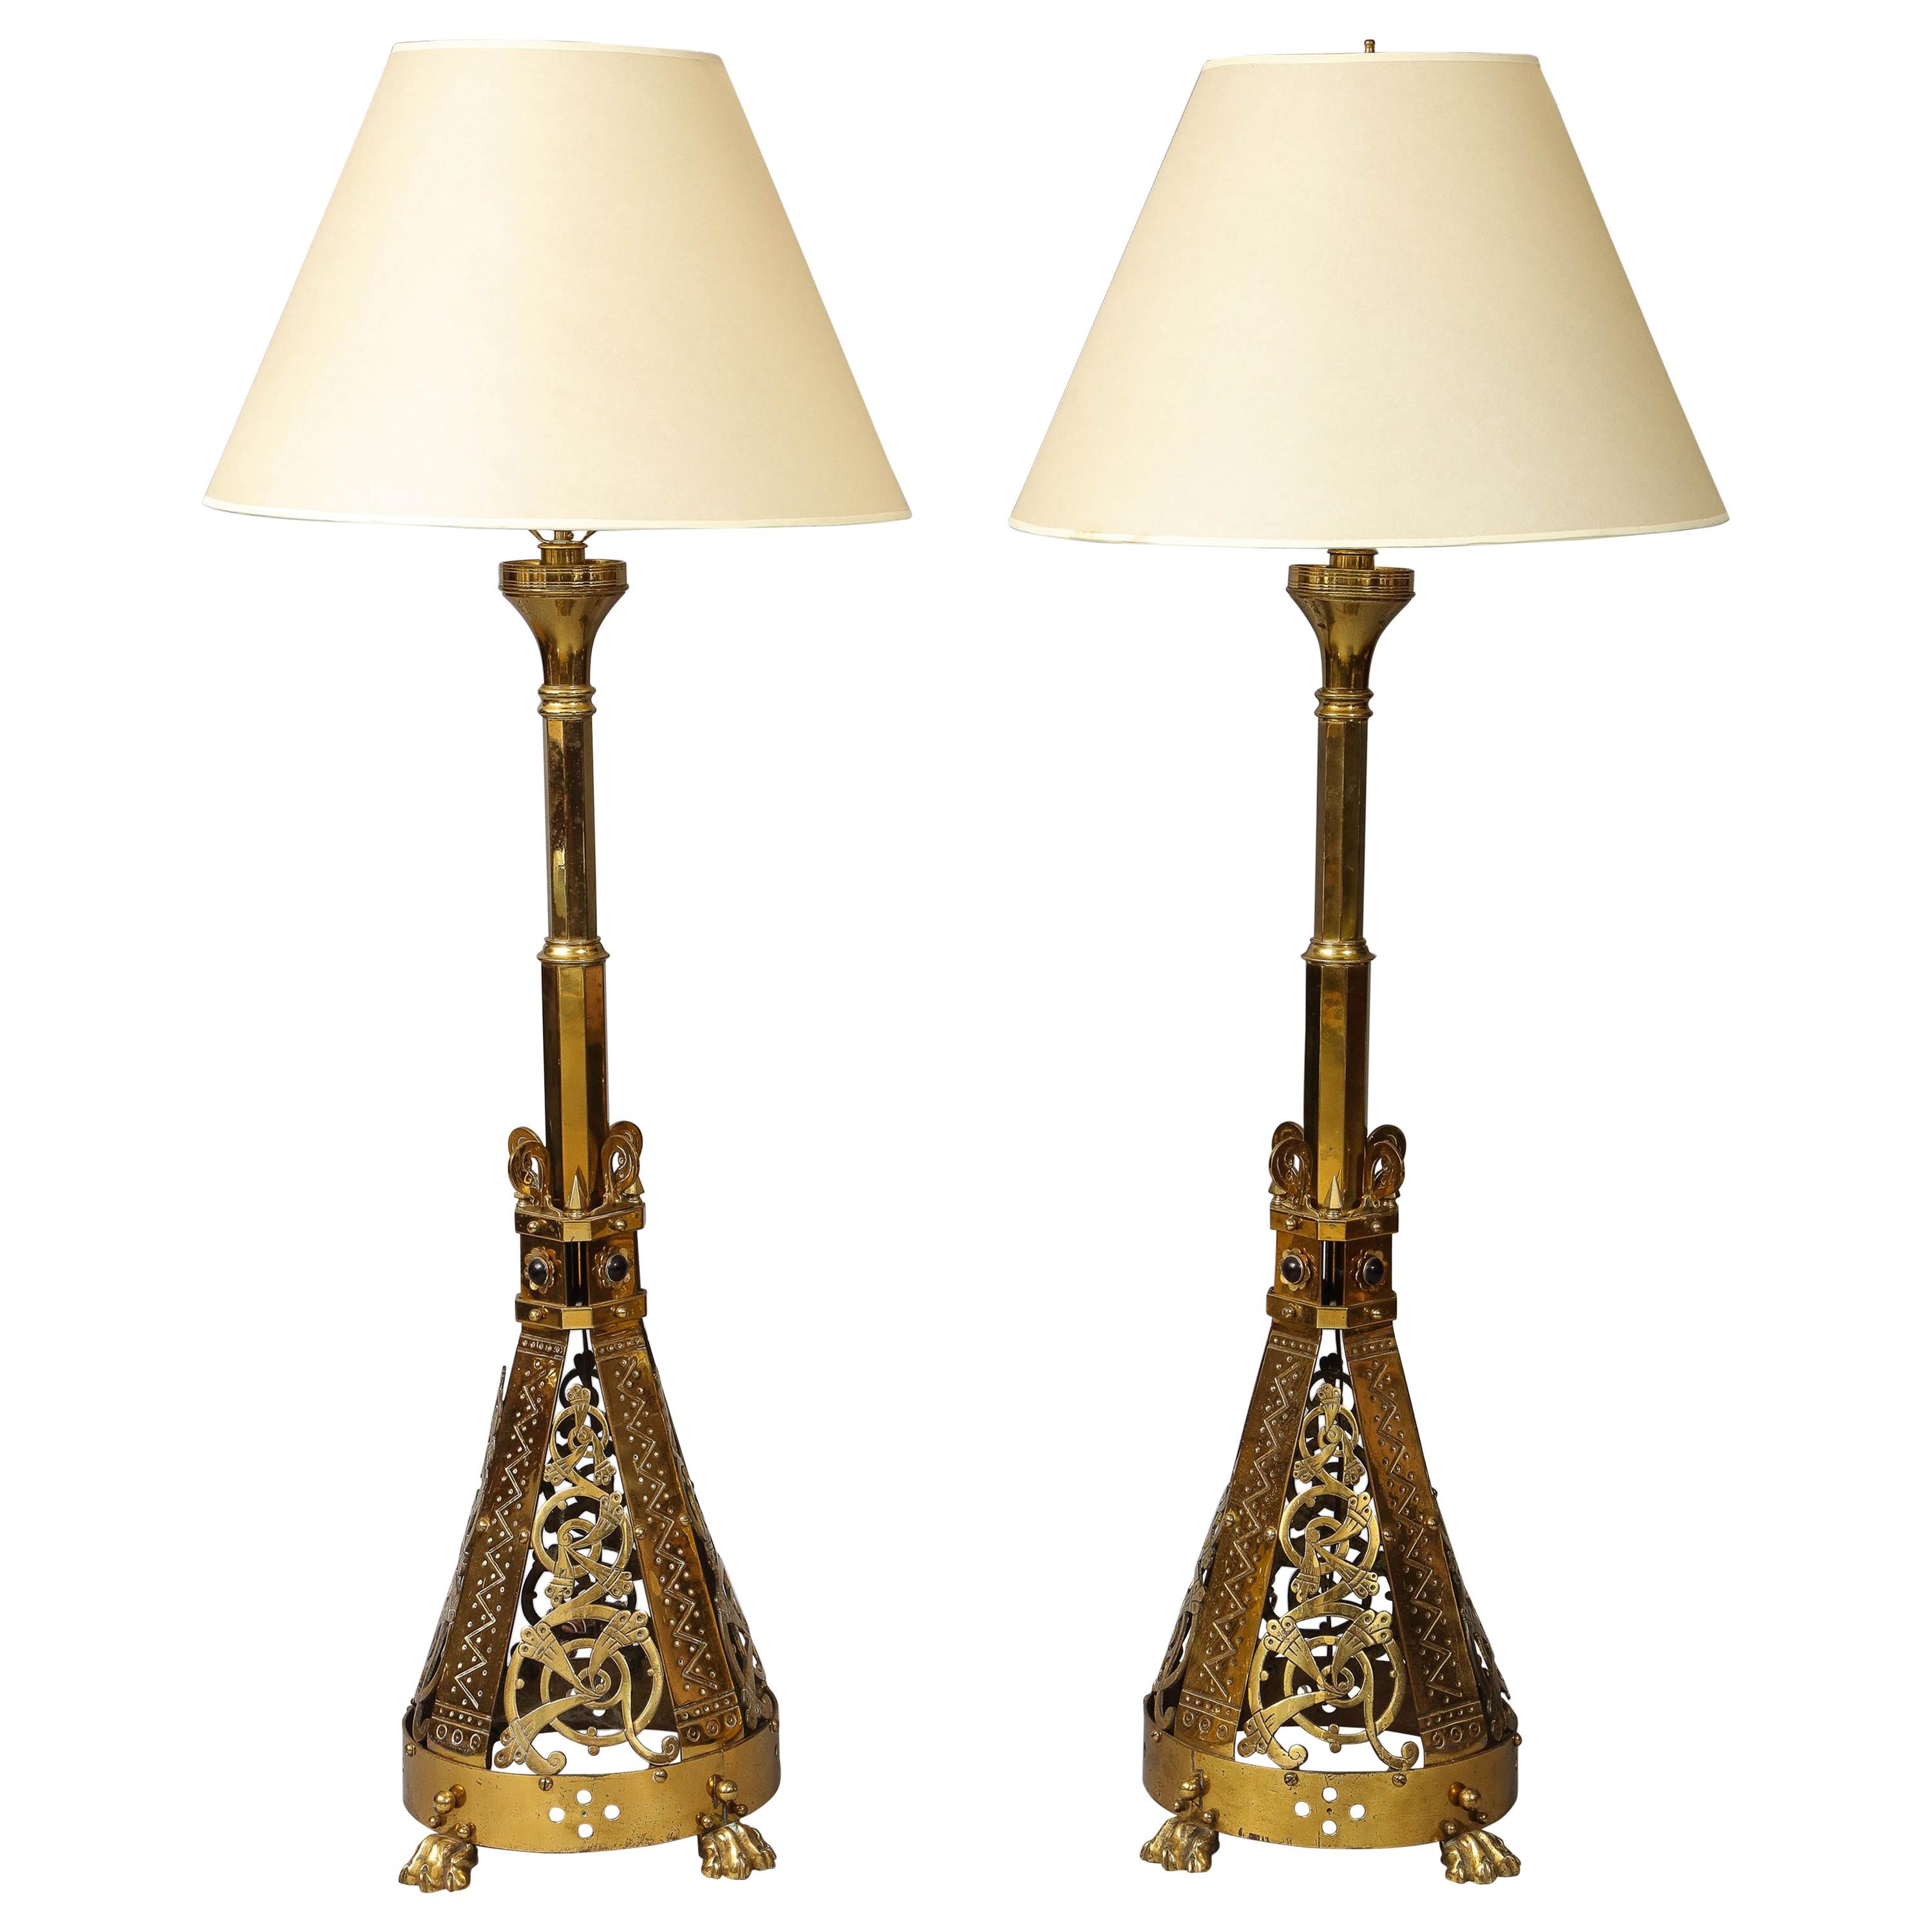 Pair of English Reform Movement Lamps